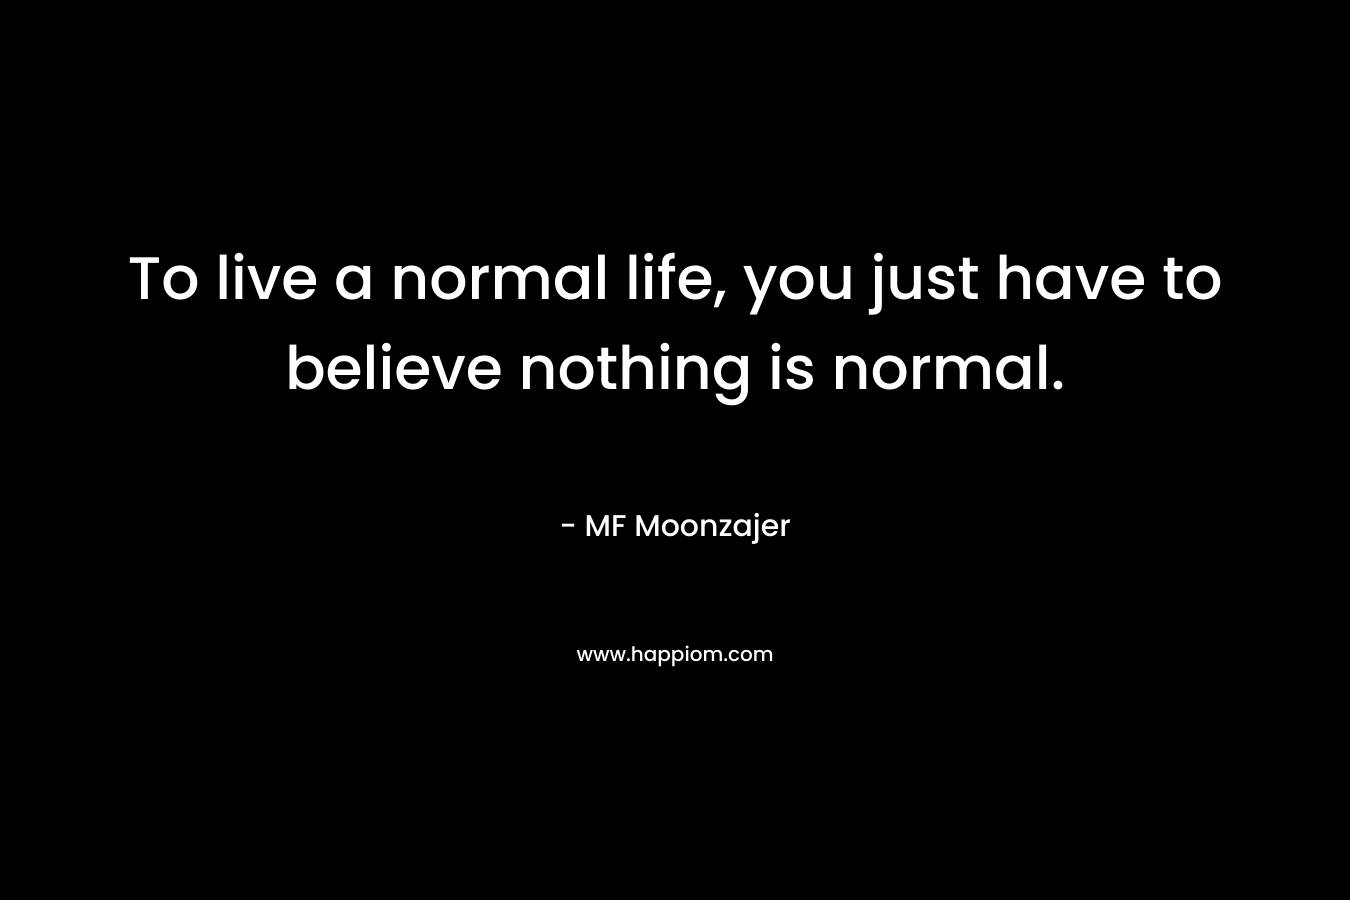 To live a normal life, you just have to believe nothing is normal.